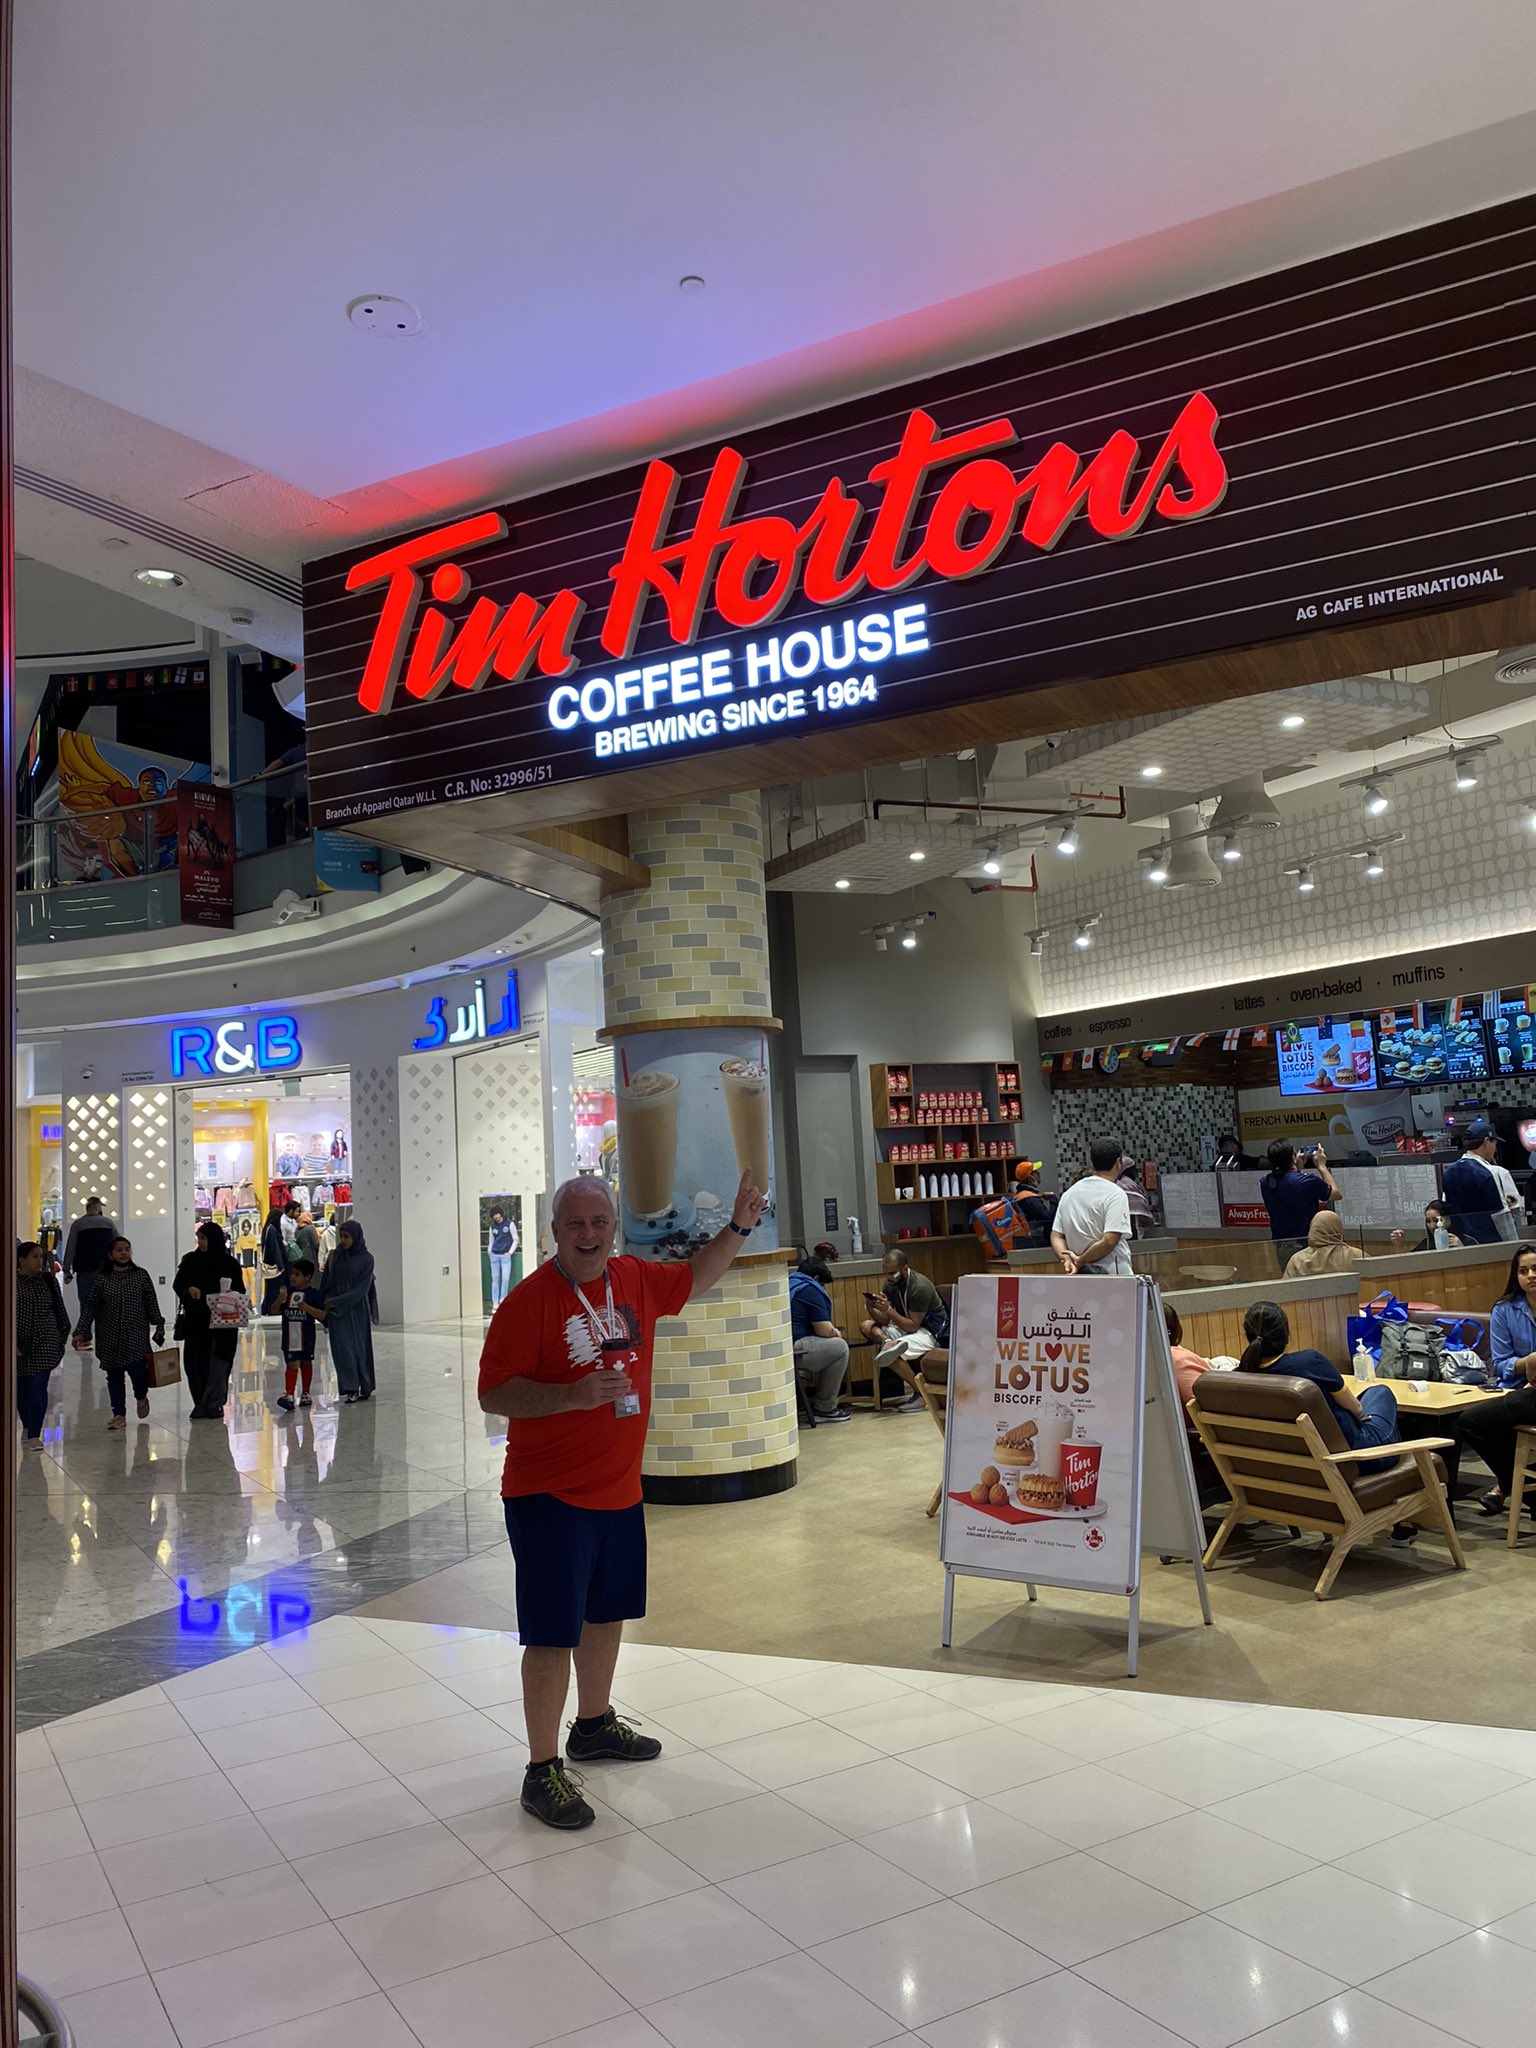 Tim Hortons Boutique Cafe In Toronto Is The Perfect Date Spot (PHOTOS) -  Narcity